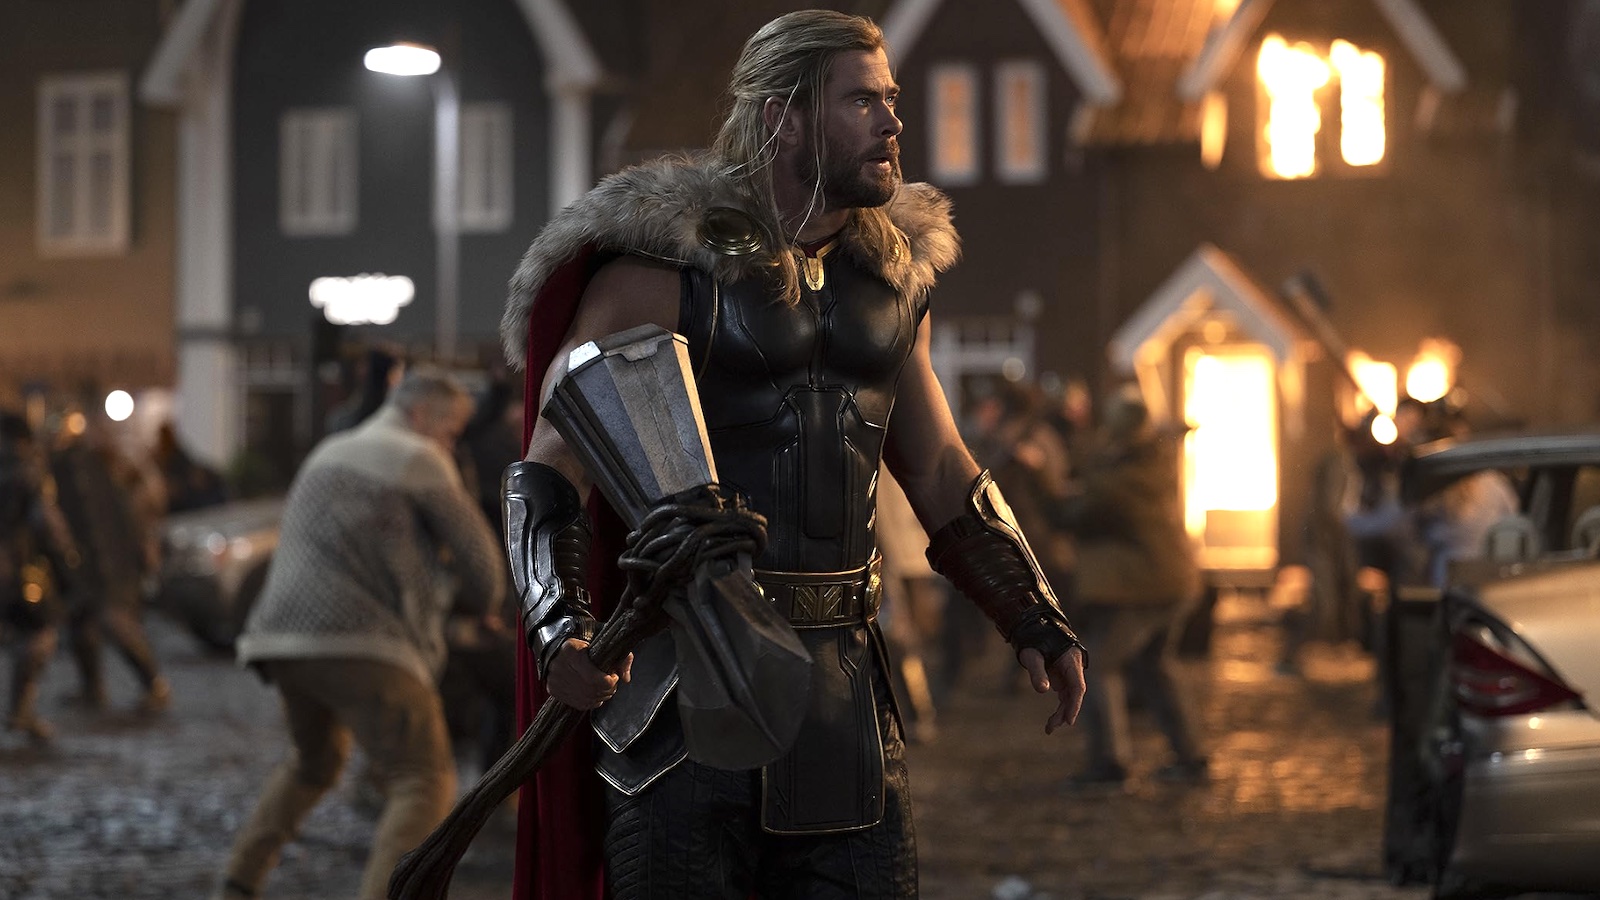 Thor and Loki Given a Modern Twist in Netflix's “Ragnarok” – Watch the  Trailer Now